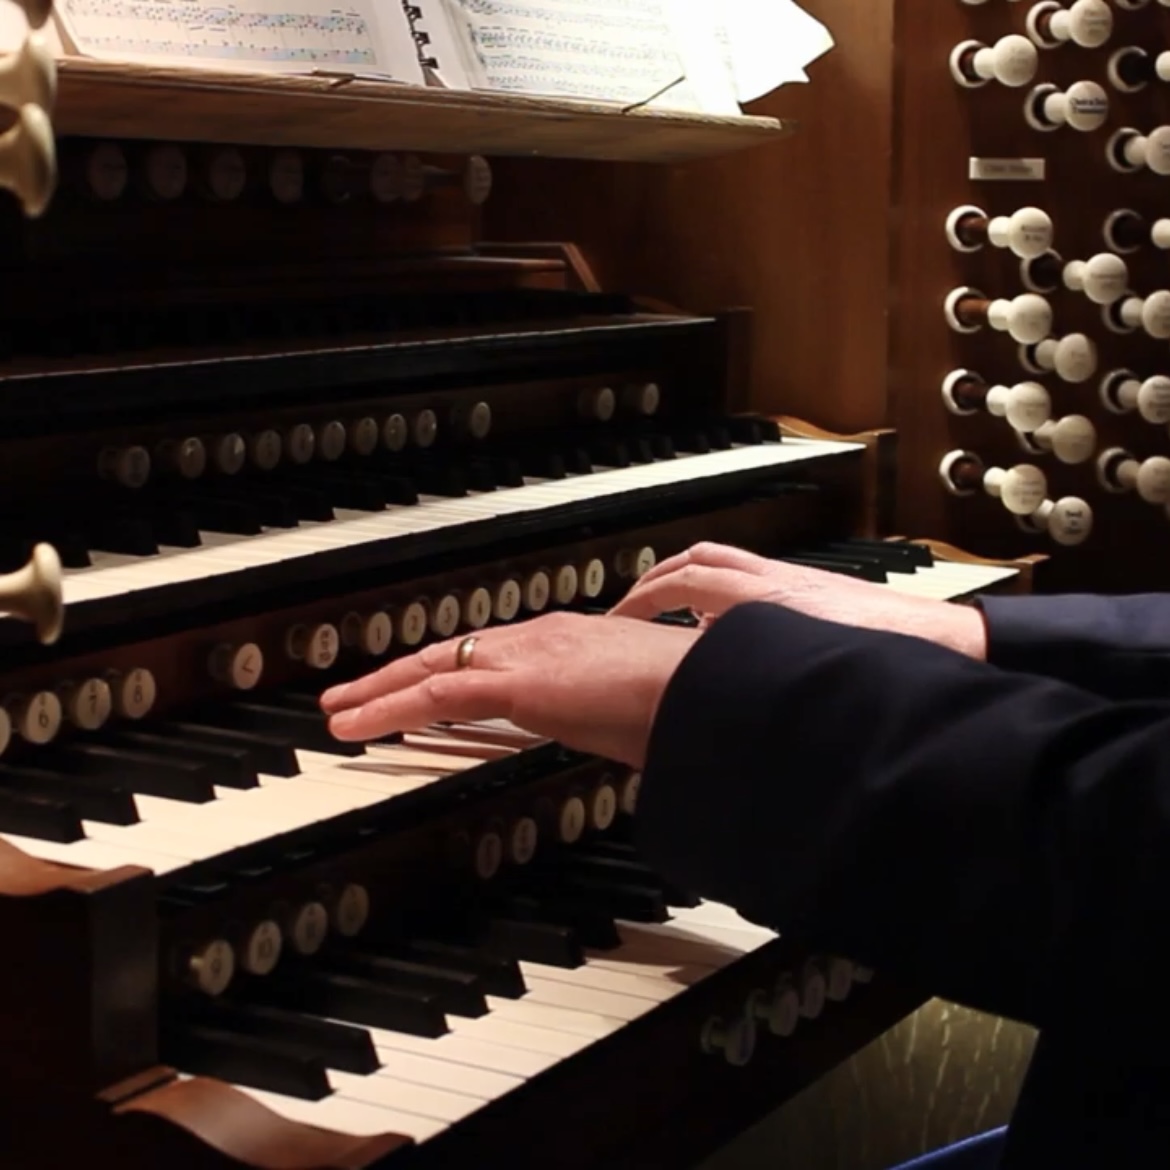  Charles Harrison, Organist and Master of the Choristers of Chichester Cathedral, plays the organ for the Tuesday Lunchtime Concert series.